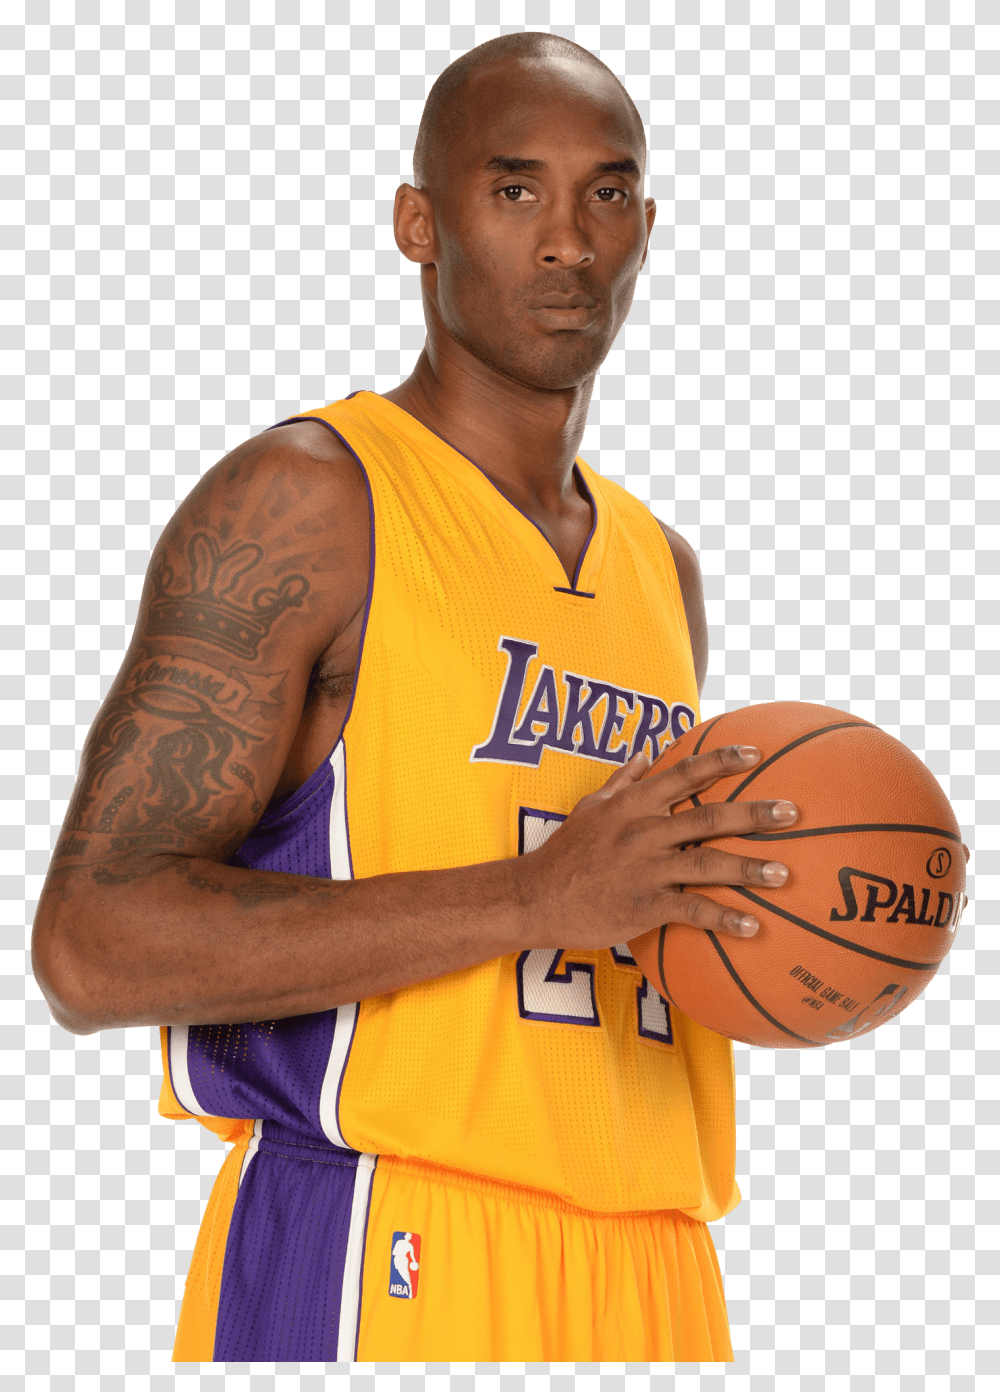 Download Nba Player Image For Free Kobe Bryant Images Download, Person, Human, People, Tattoo Transparent Png